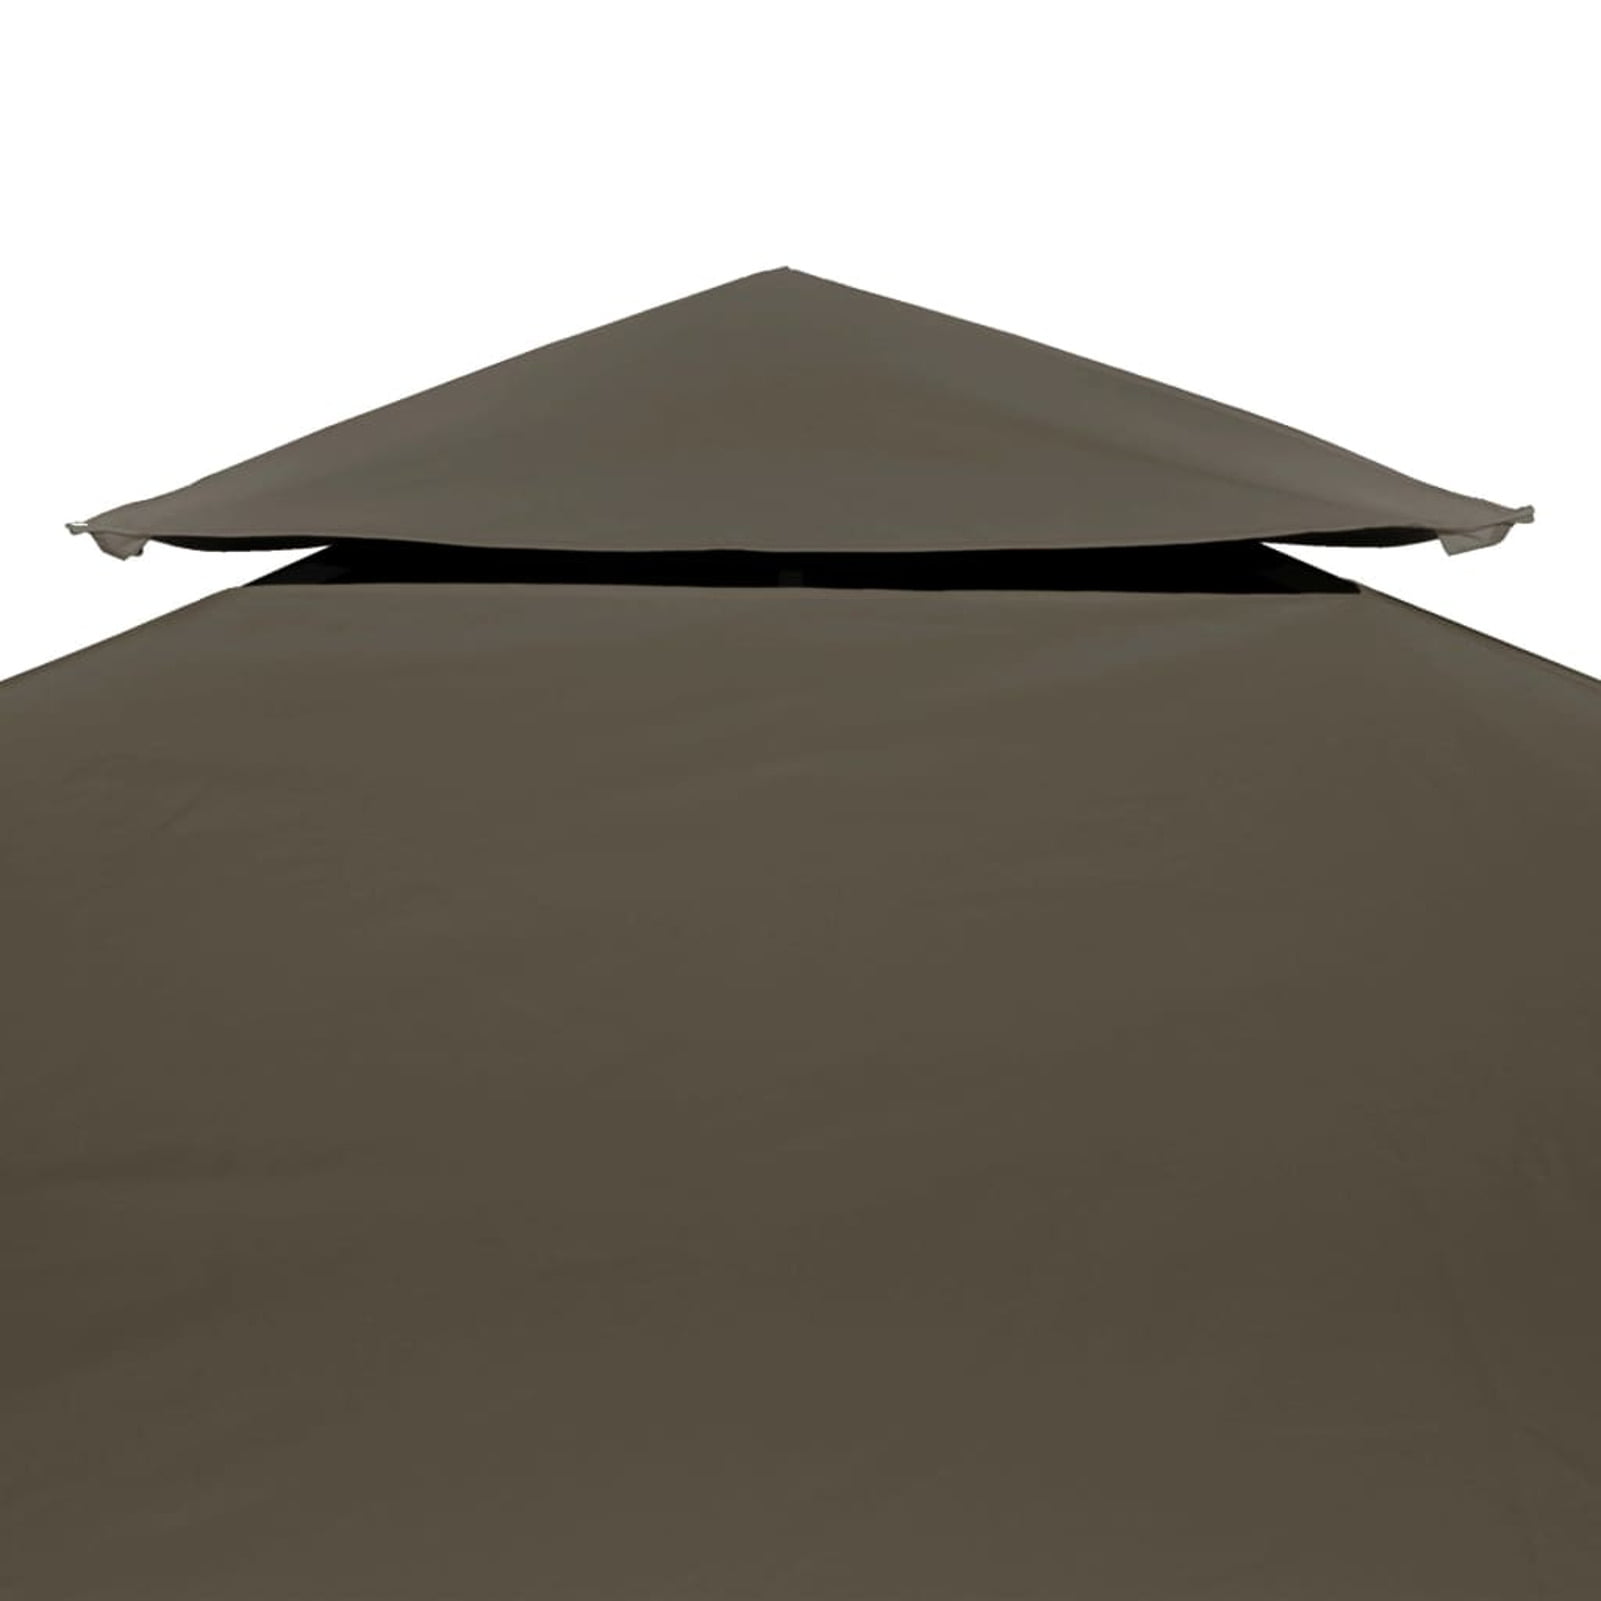 Details about   2-Tier Gazebo Top Cover 310 g/m² 3x3m Taupe Waterproof Outdoor Event Canopy Only 